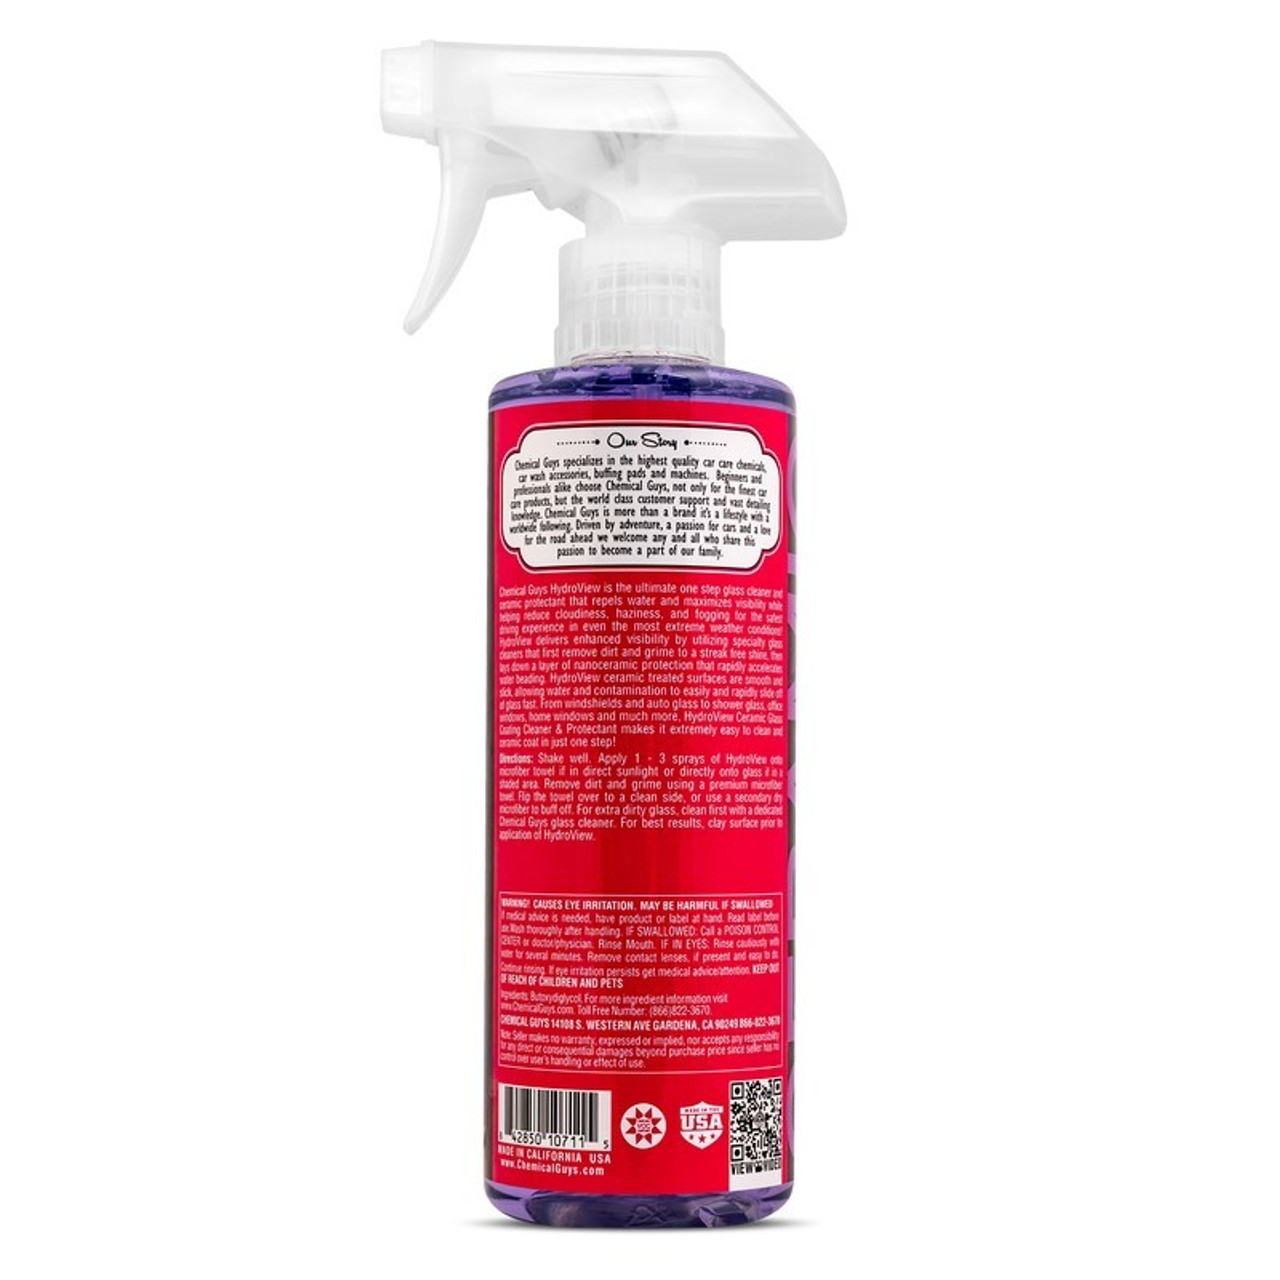 Chemical Guys HydroView Ceramic Glass Cleaner & Coating - 16oz - Label